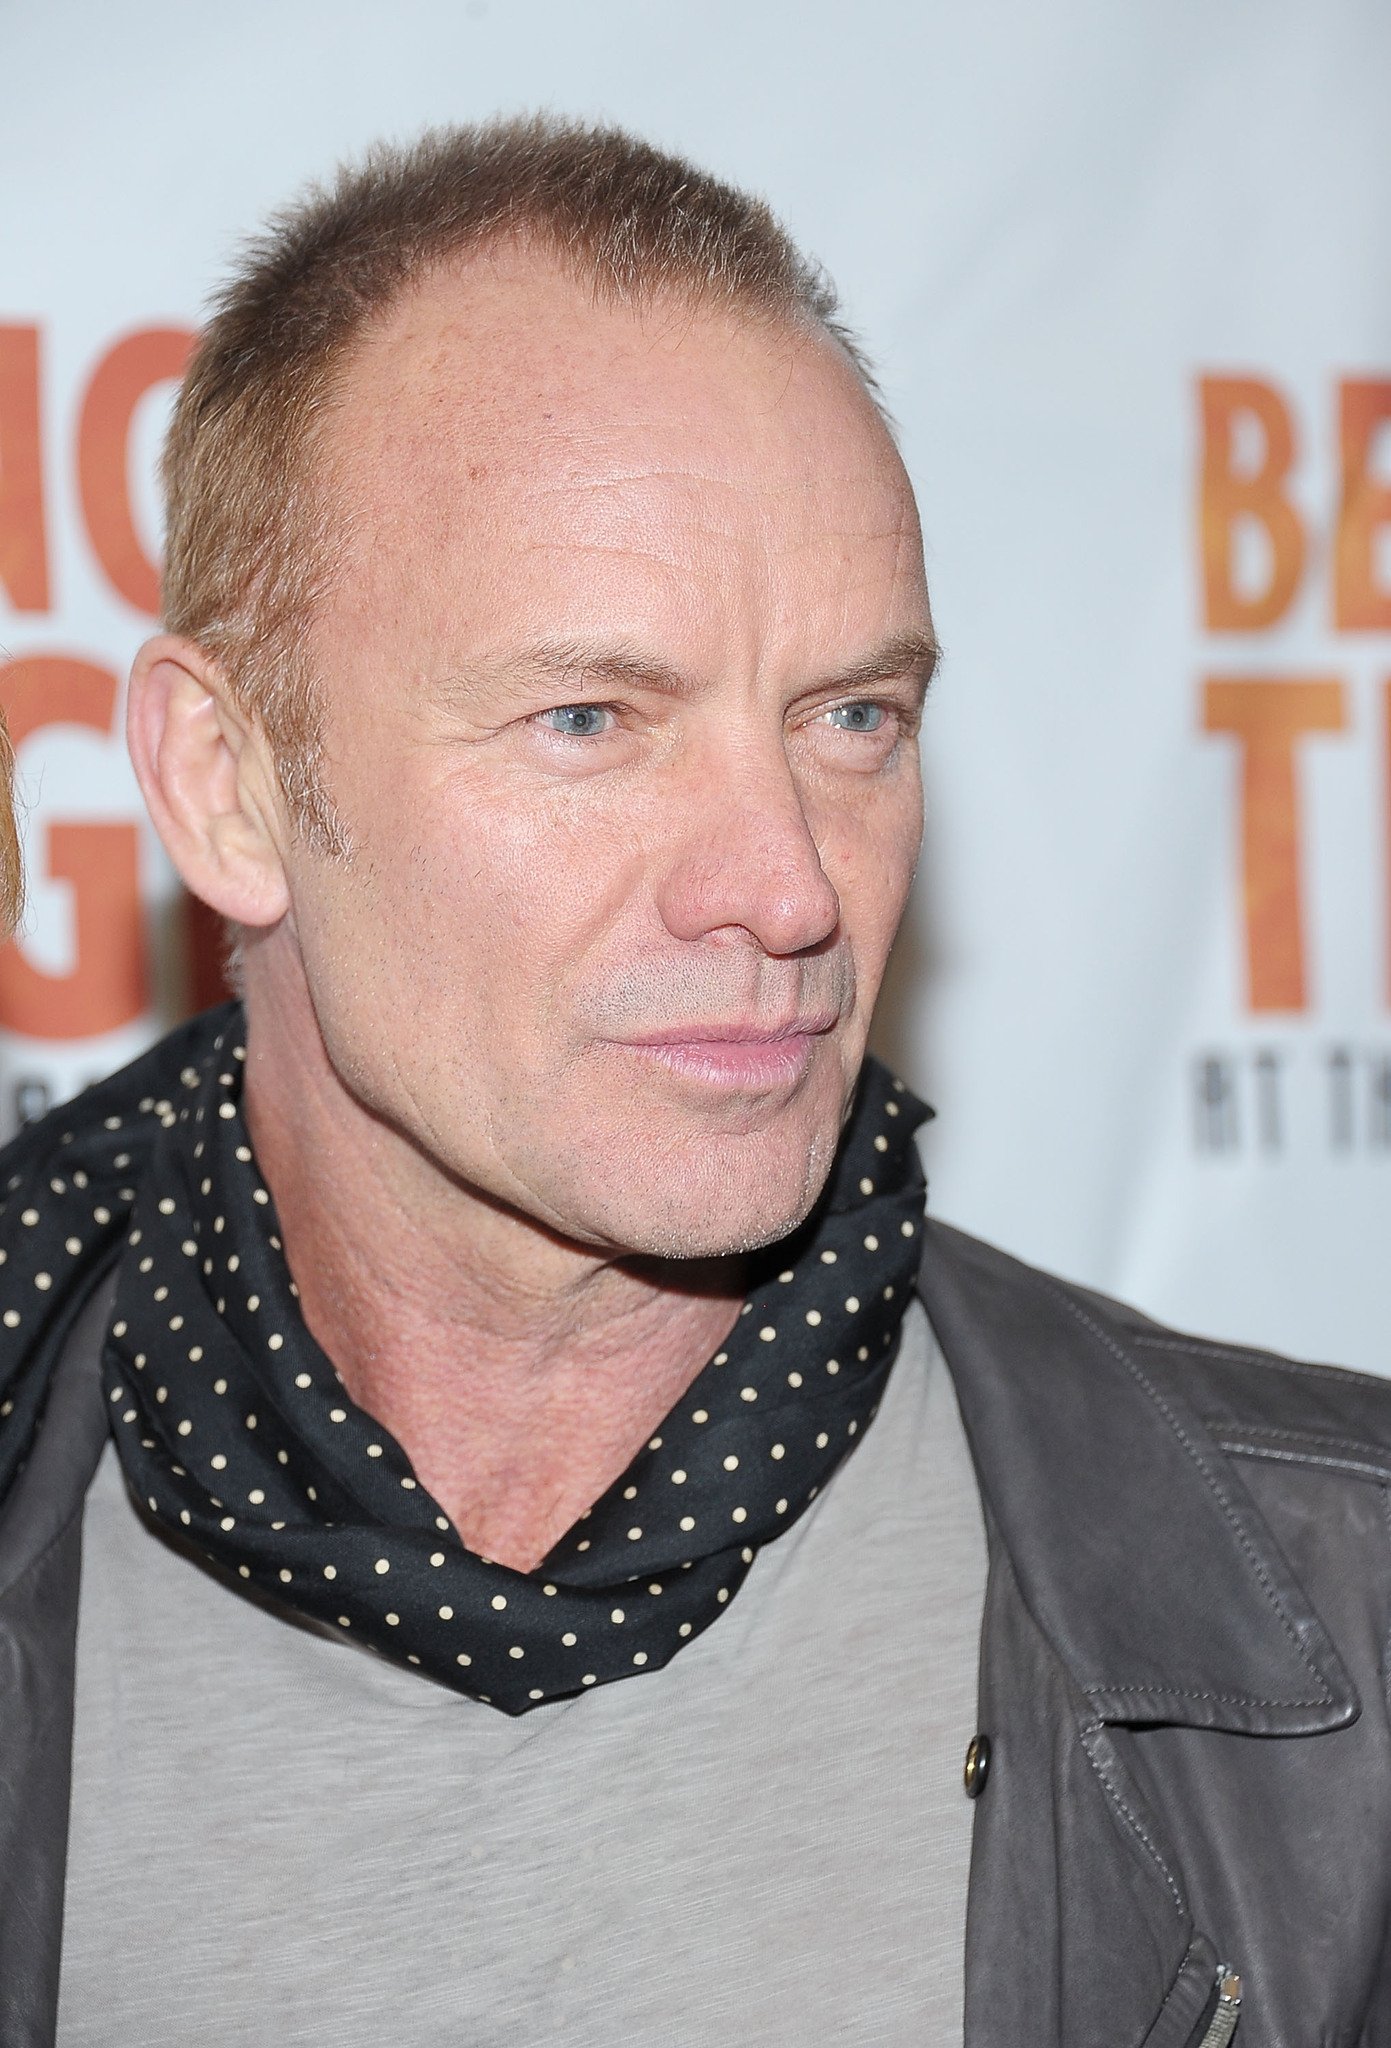 Sting as a Christian